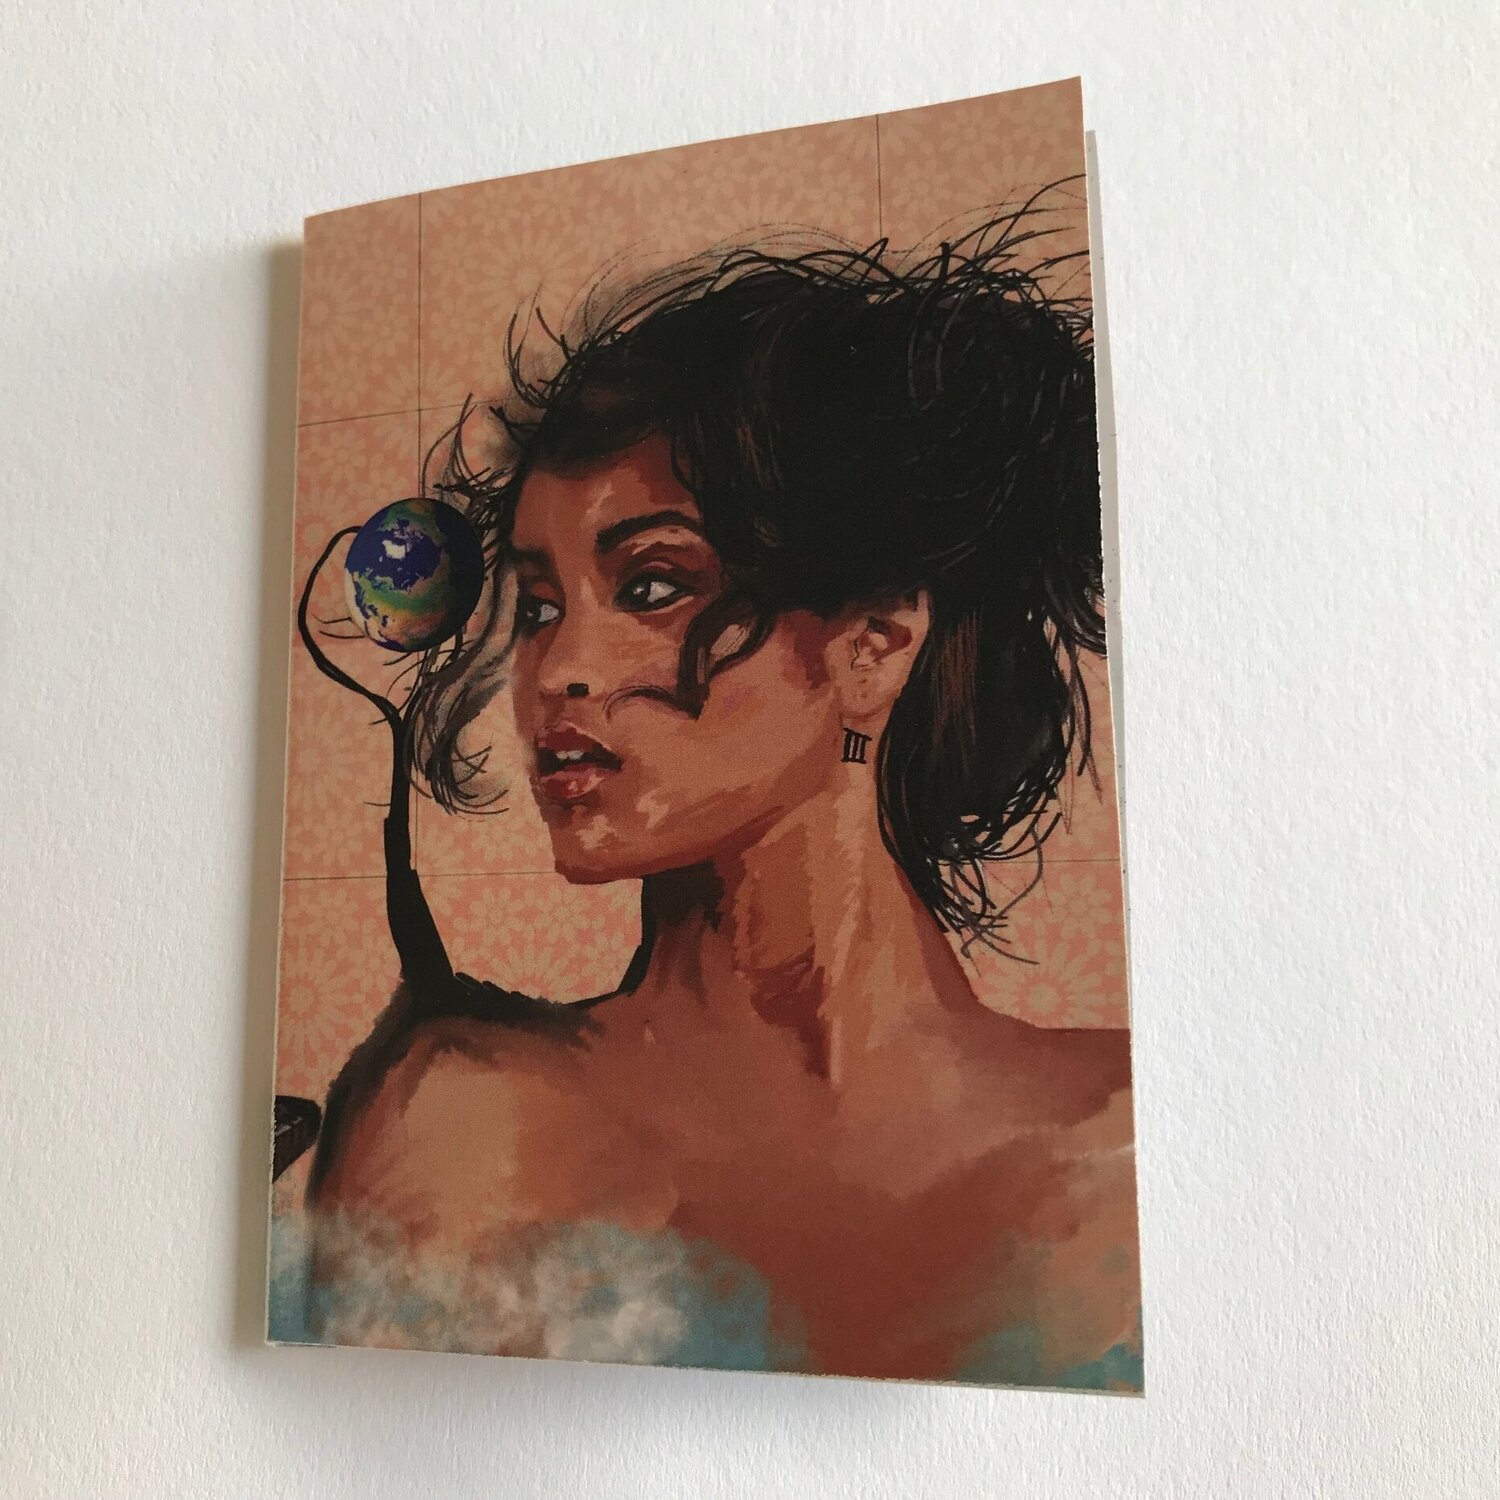 photo of zine cover: brown skinned person in profile, eyeball tree growing on their shoulder